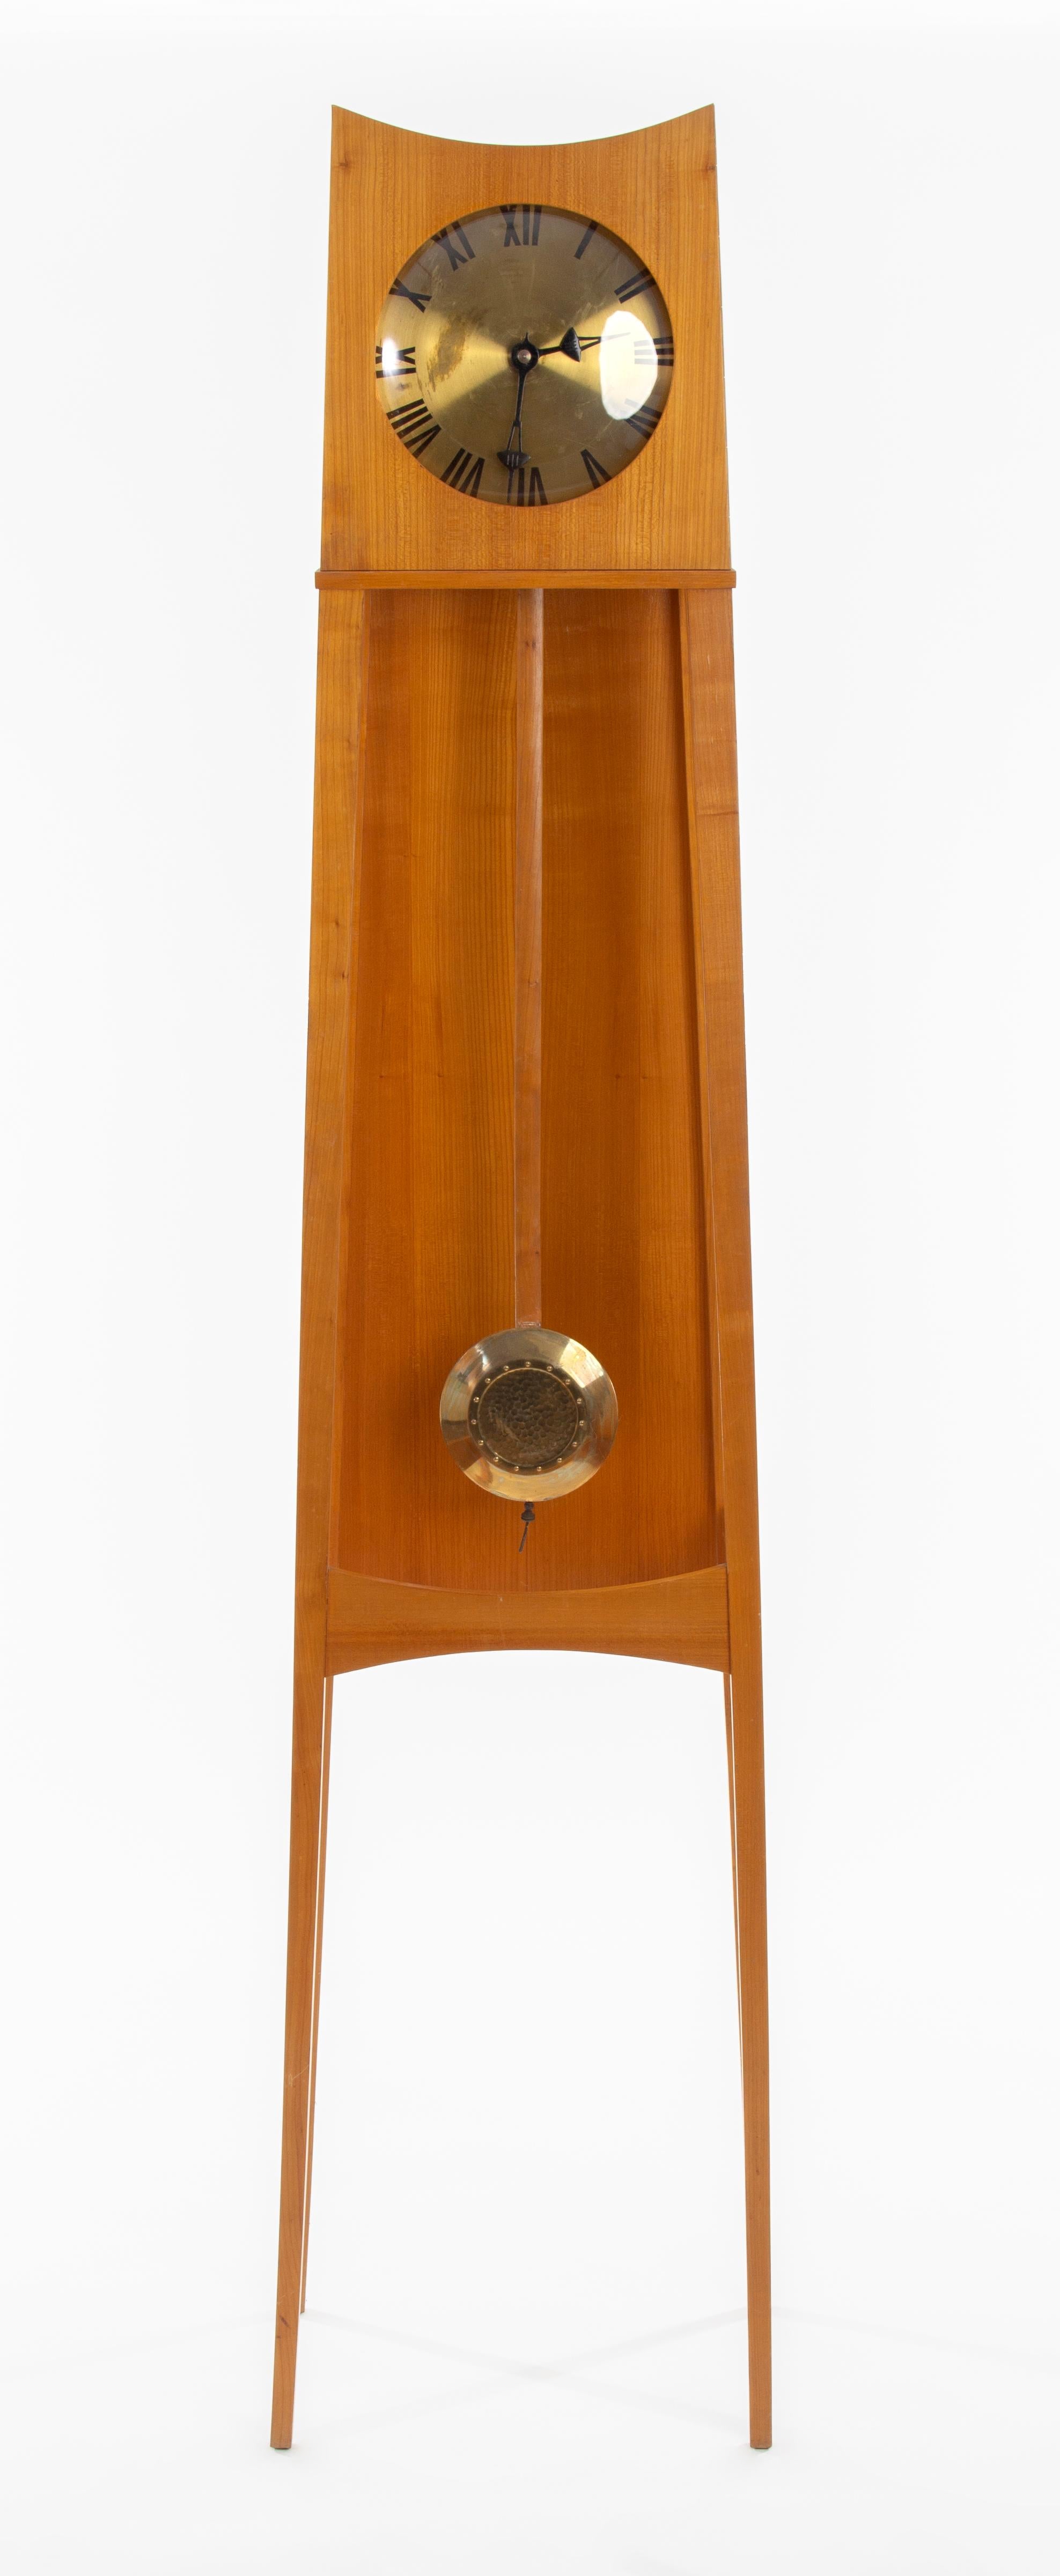 Standing clock in Art Nouveau style, manufactured arround 1910.
Wooden parts of sycamore maple tree.